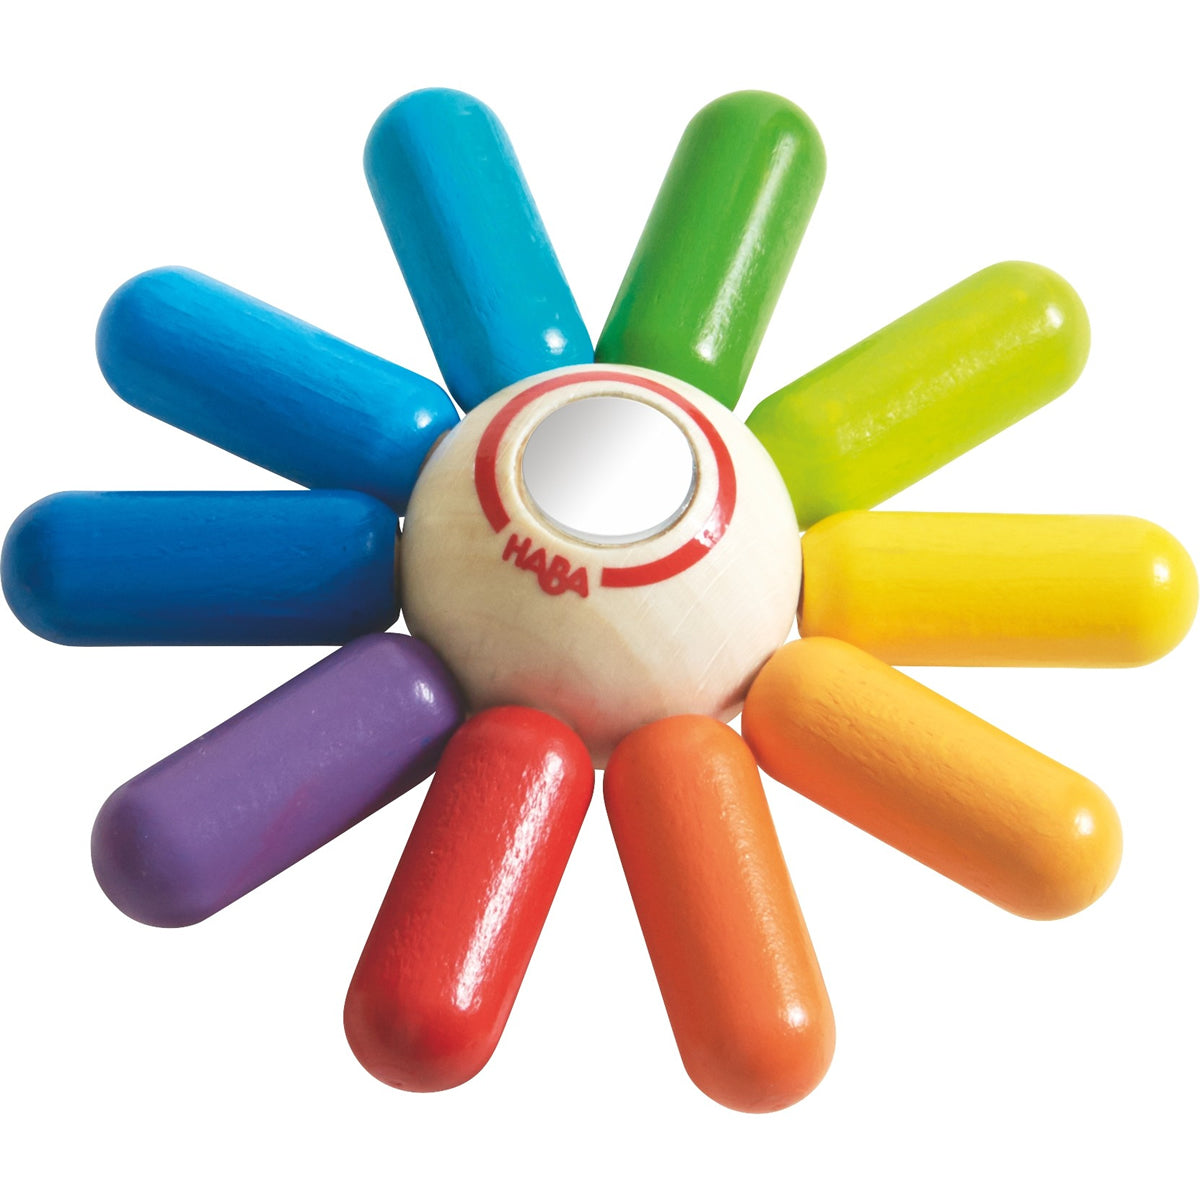 Haba Rainbow Sun Teether - Crunch Natural Parenting is where to buy